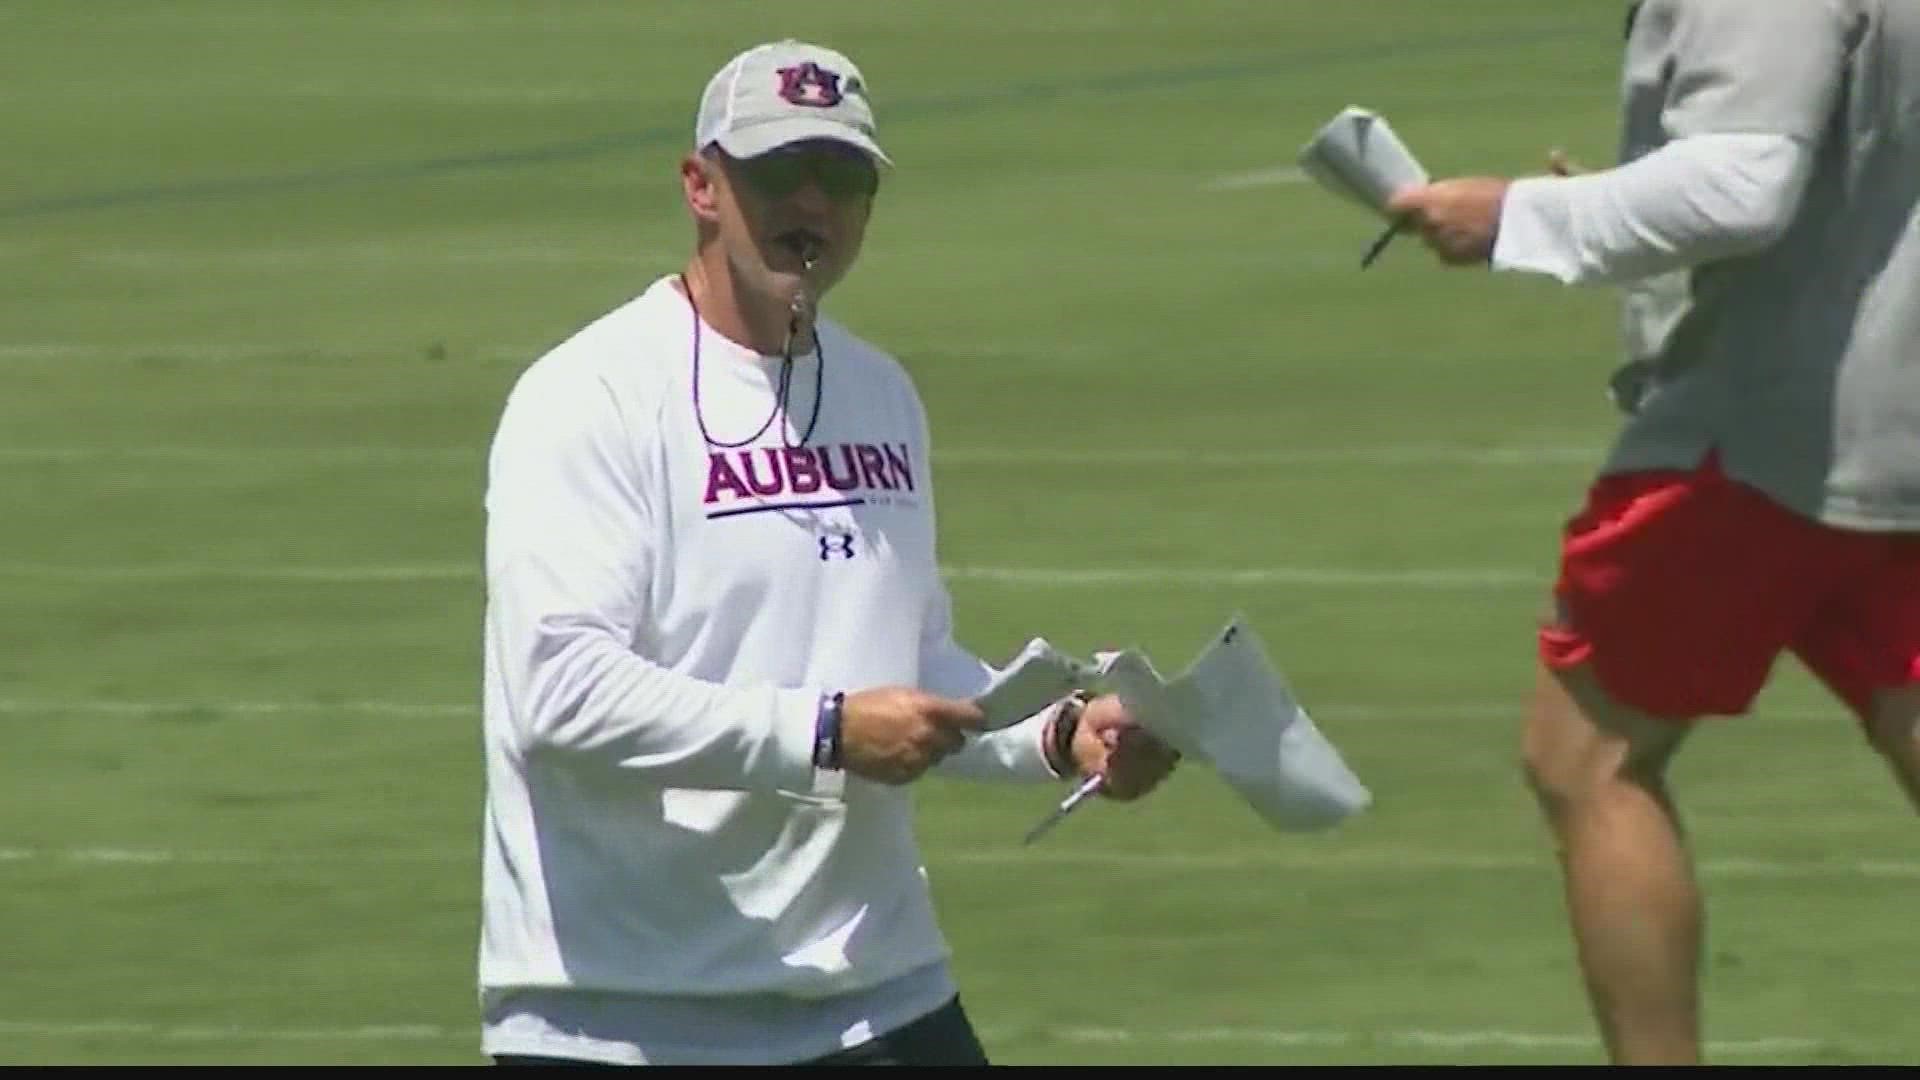 Auburn kicked off preseason practice Friday with veterans working in the morning and newcomers going in the evening, 29 days before the Tigers host Mercer Sept. 3rd